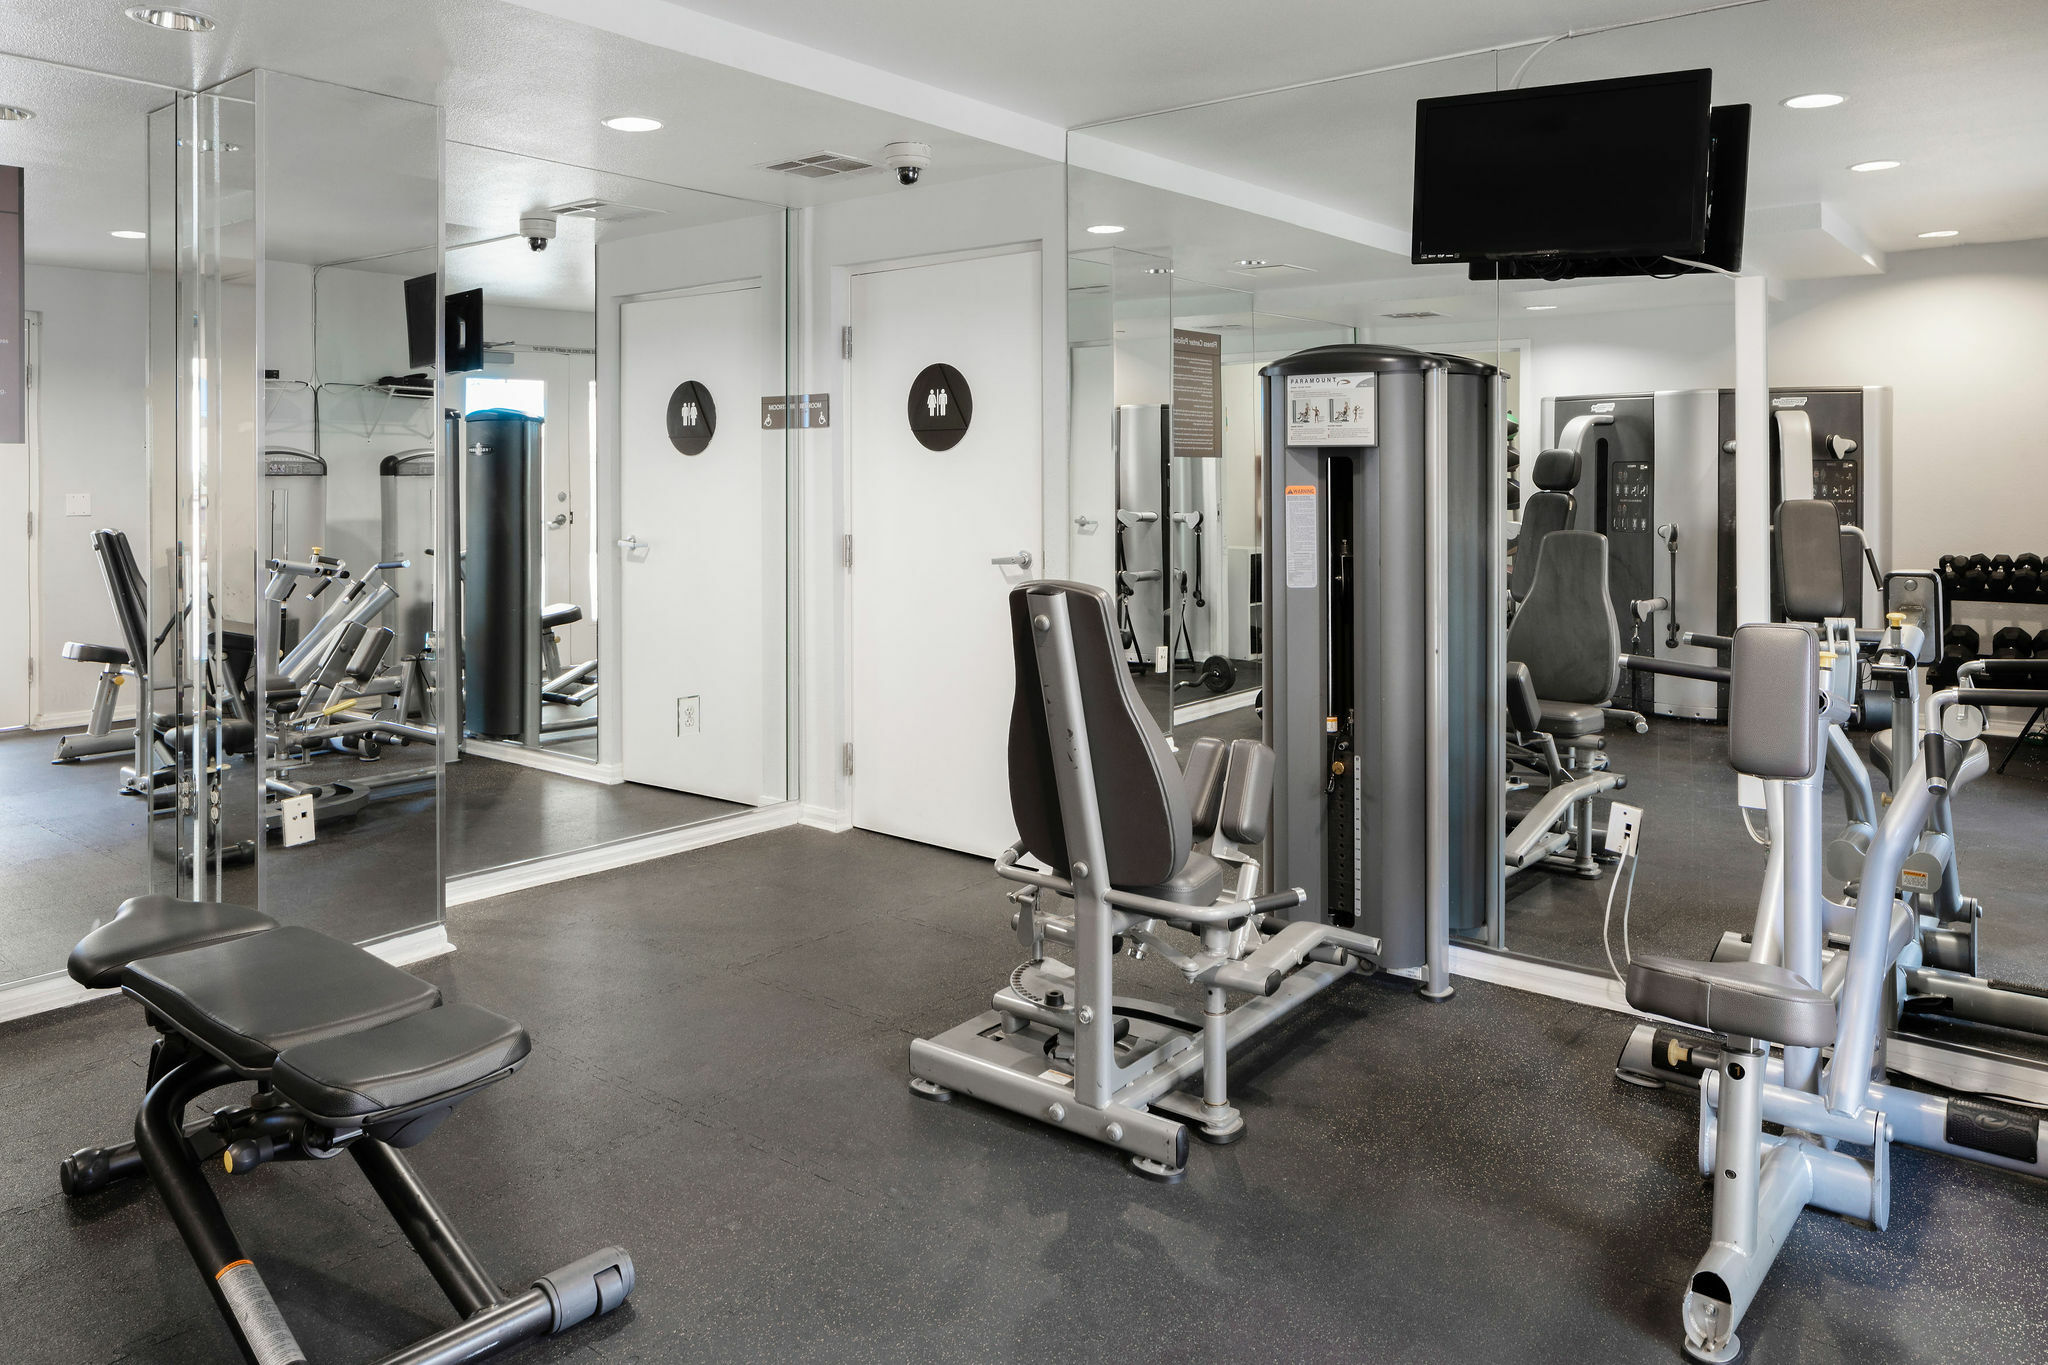 interior of gym with fitness equipment and mirrors